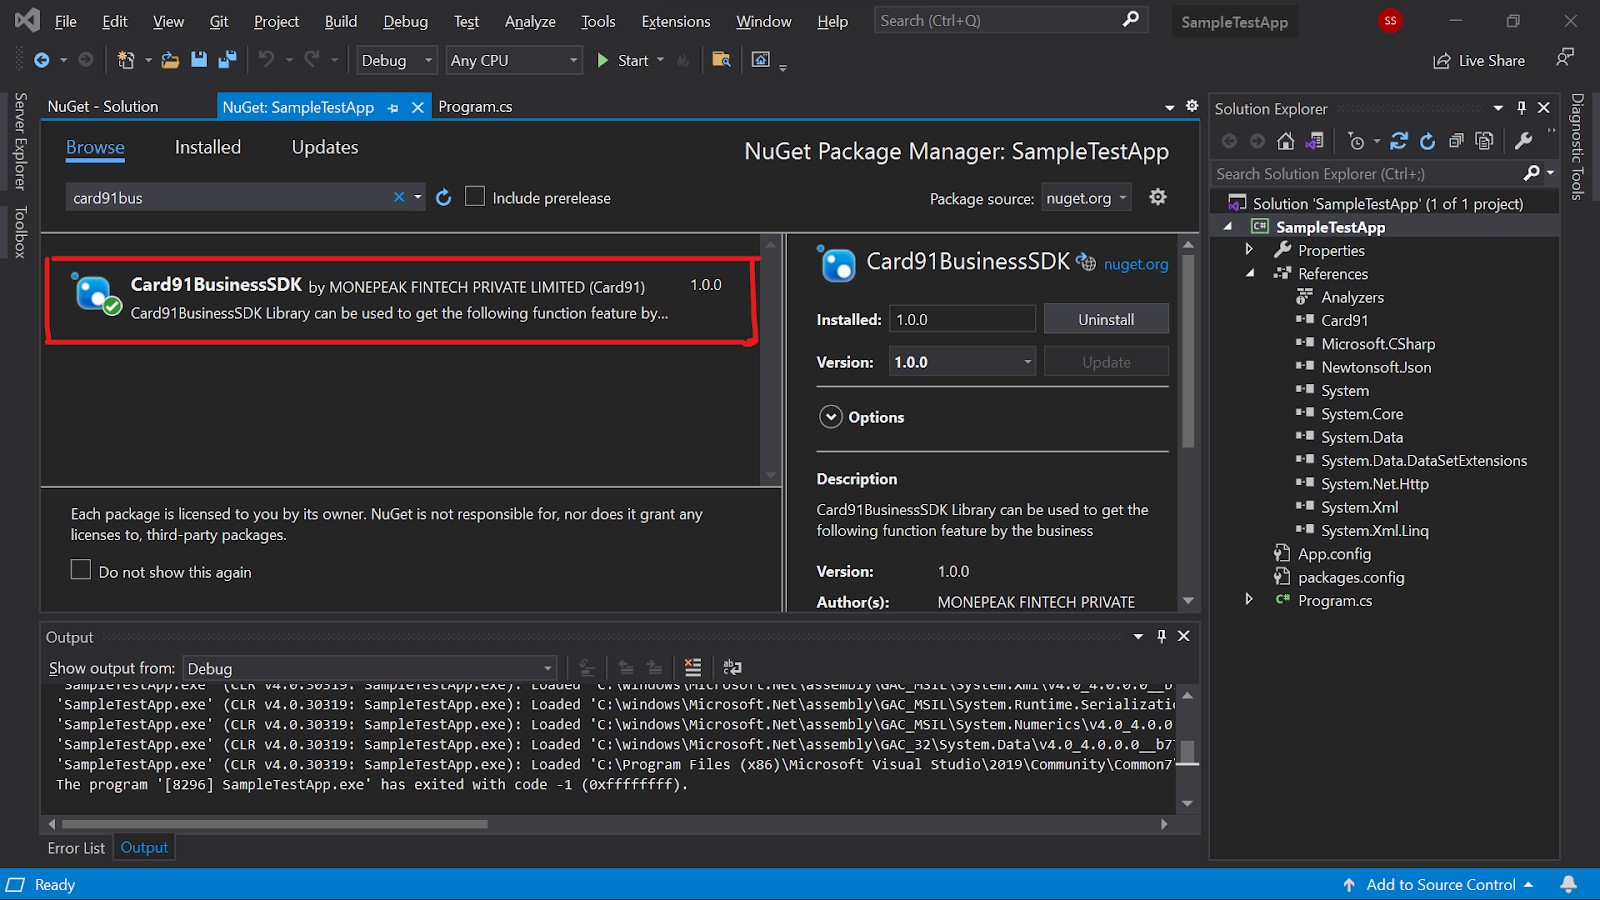 How to add Nuget Package